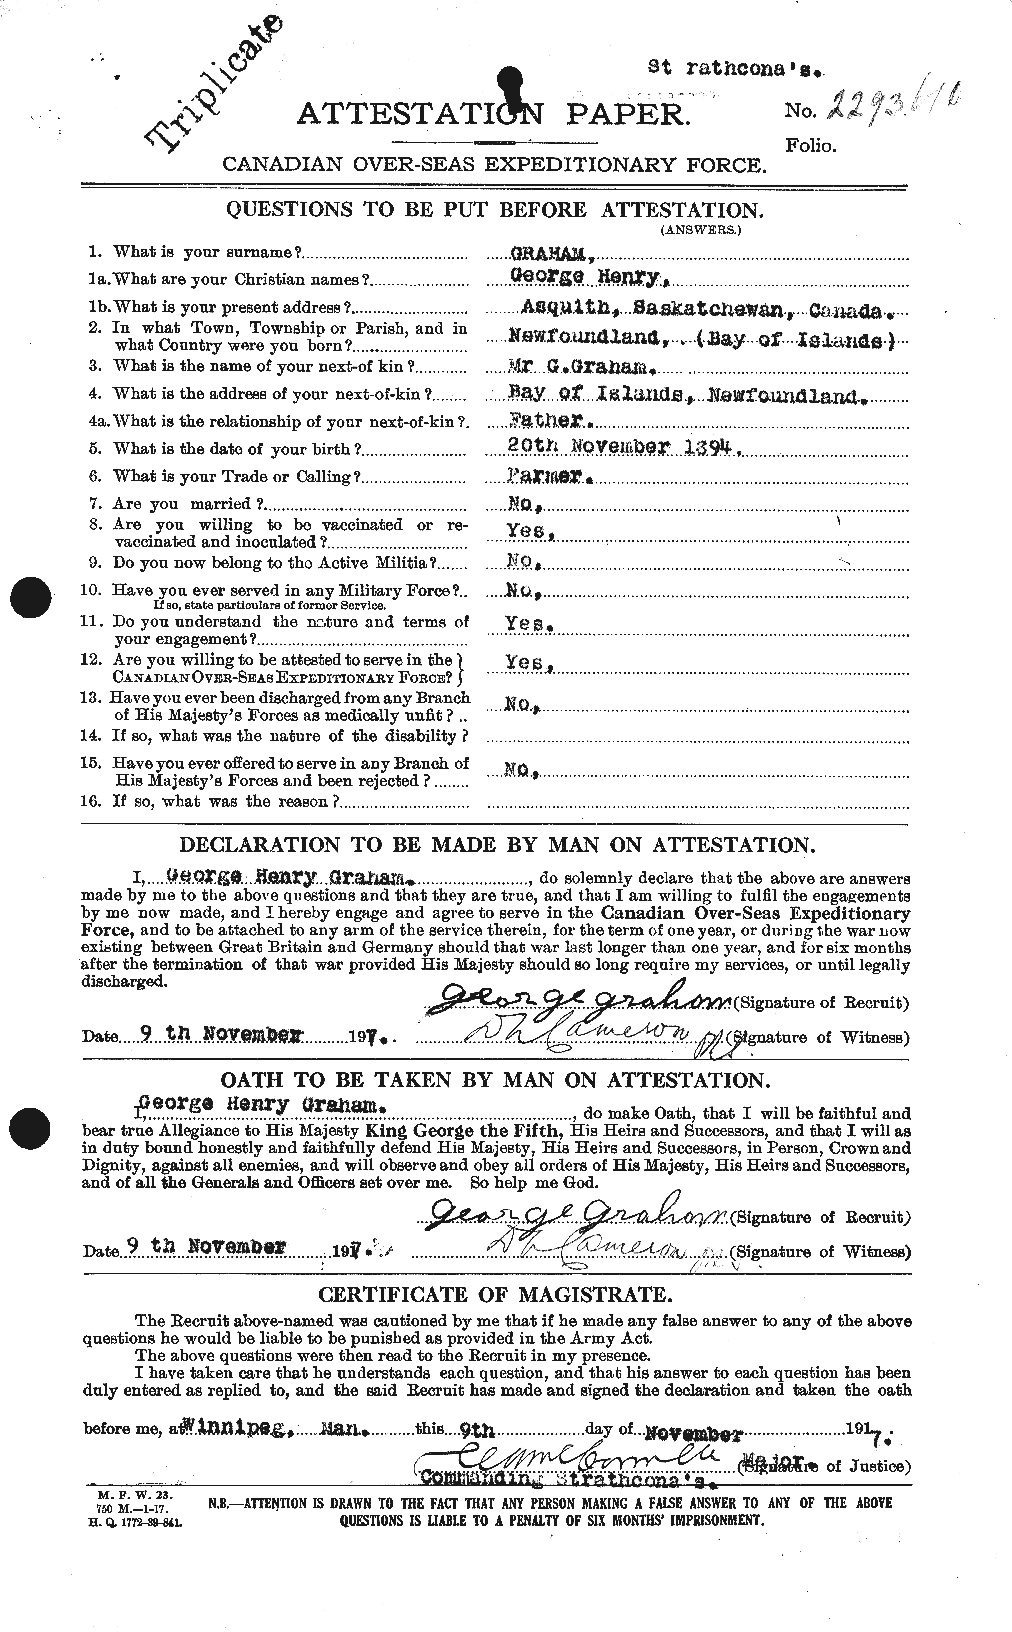 Personnel Records of the First World War - CEF 357661a